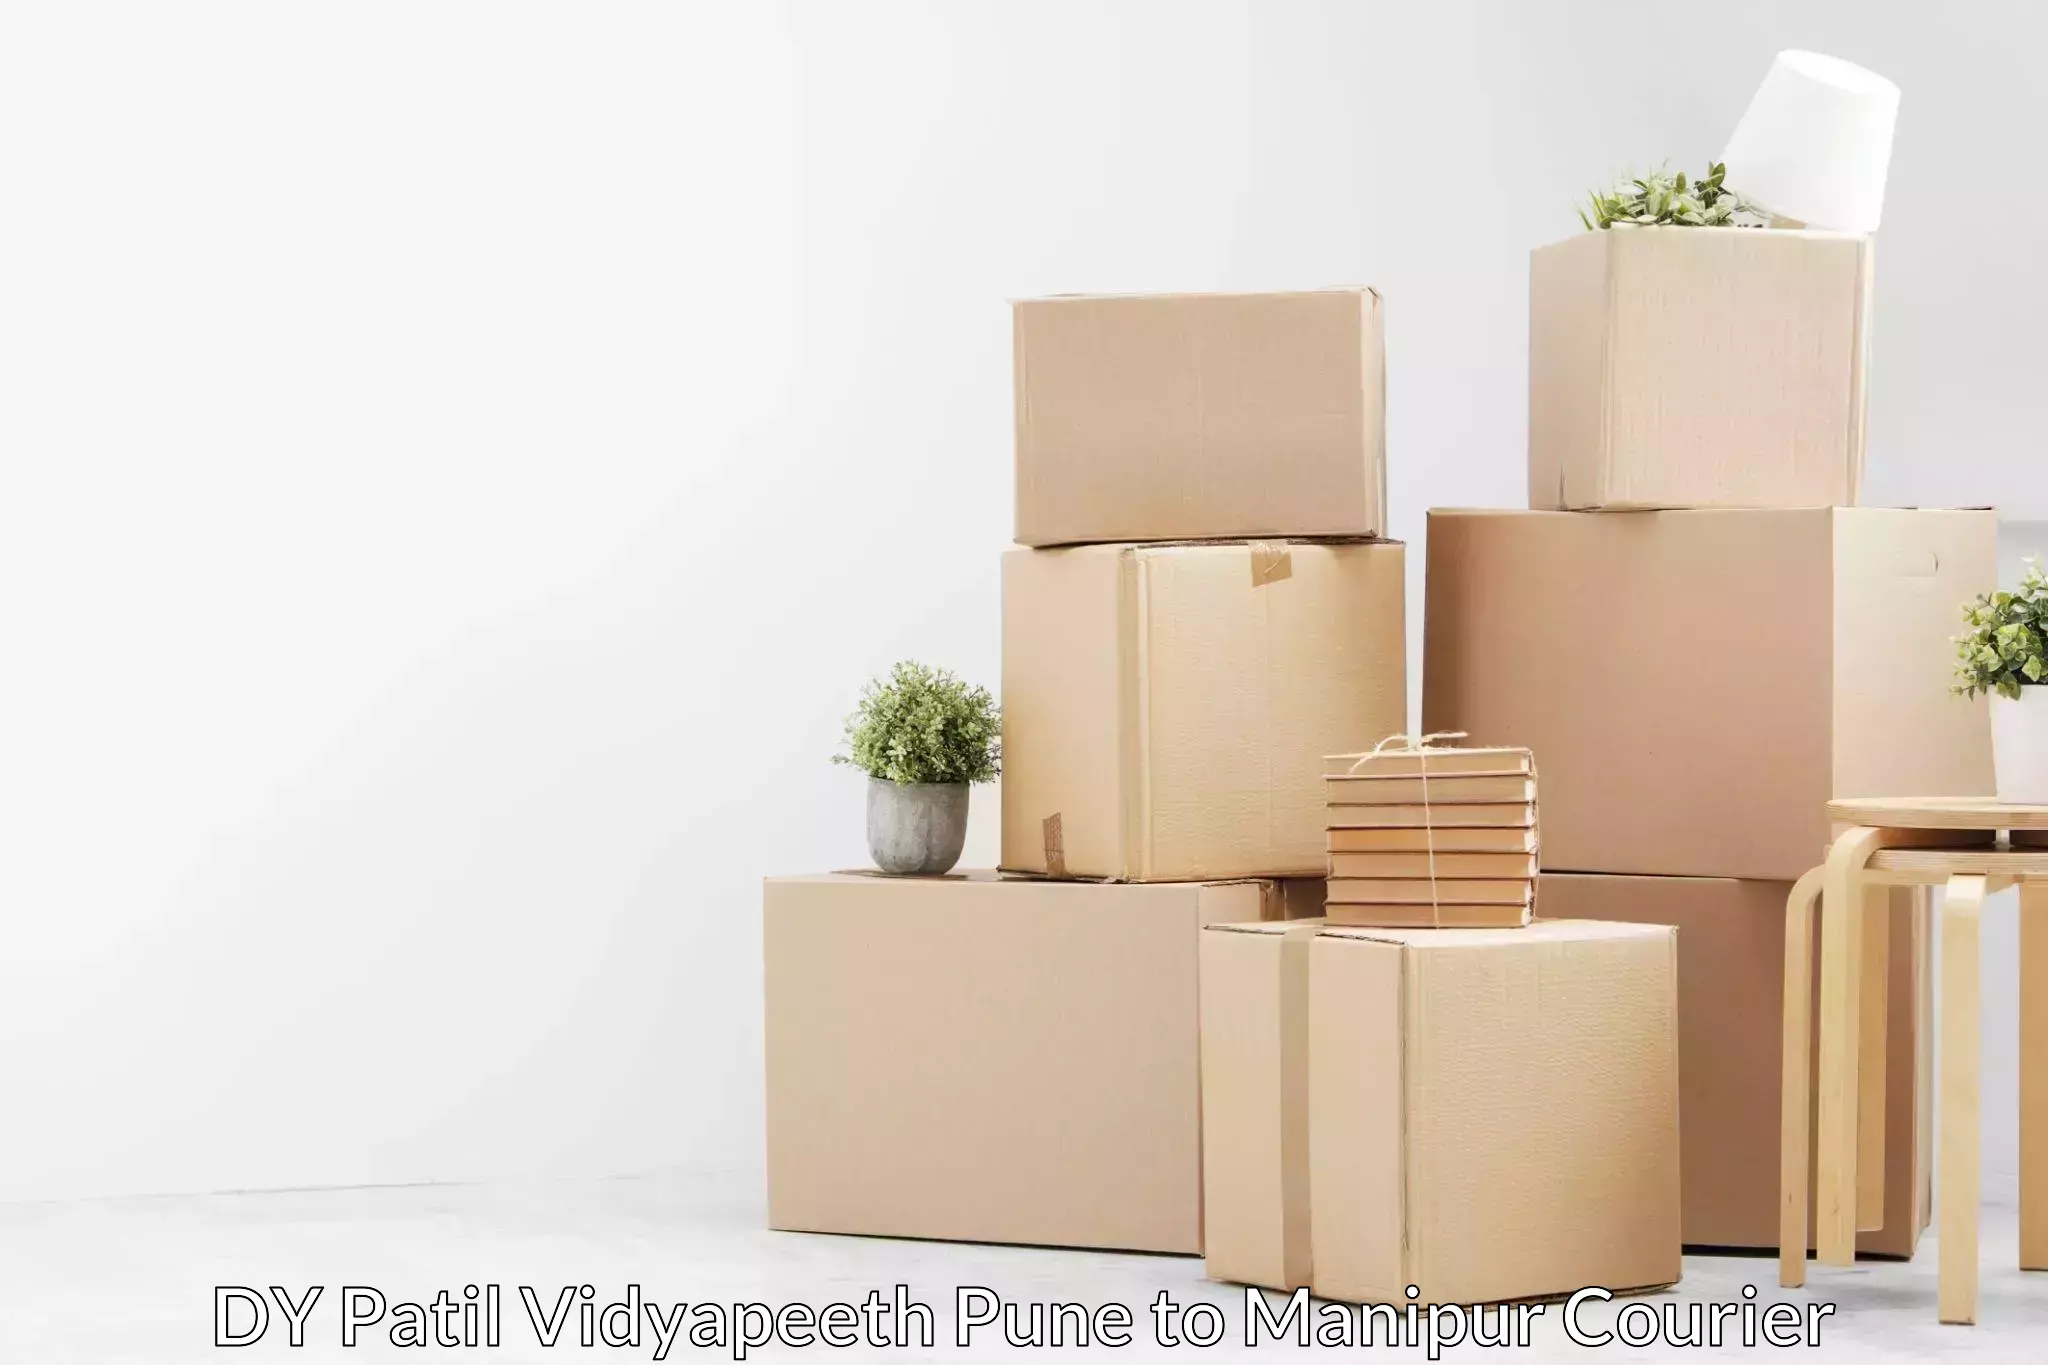 Moving and handling services DY Patil Vidyapeeth Pune to Manipur